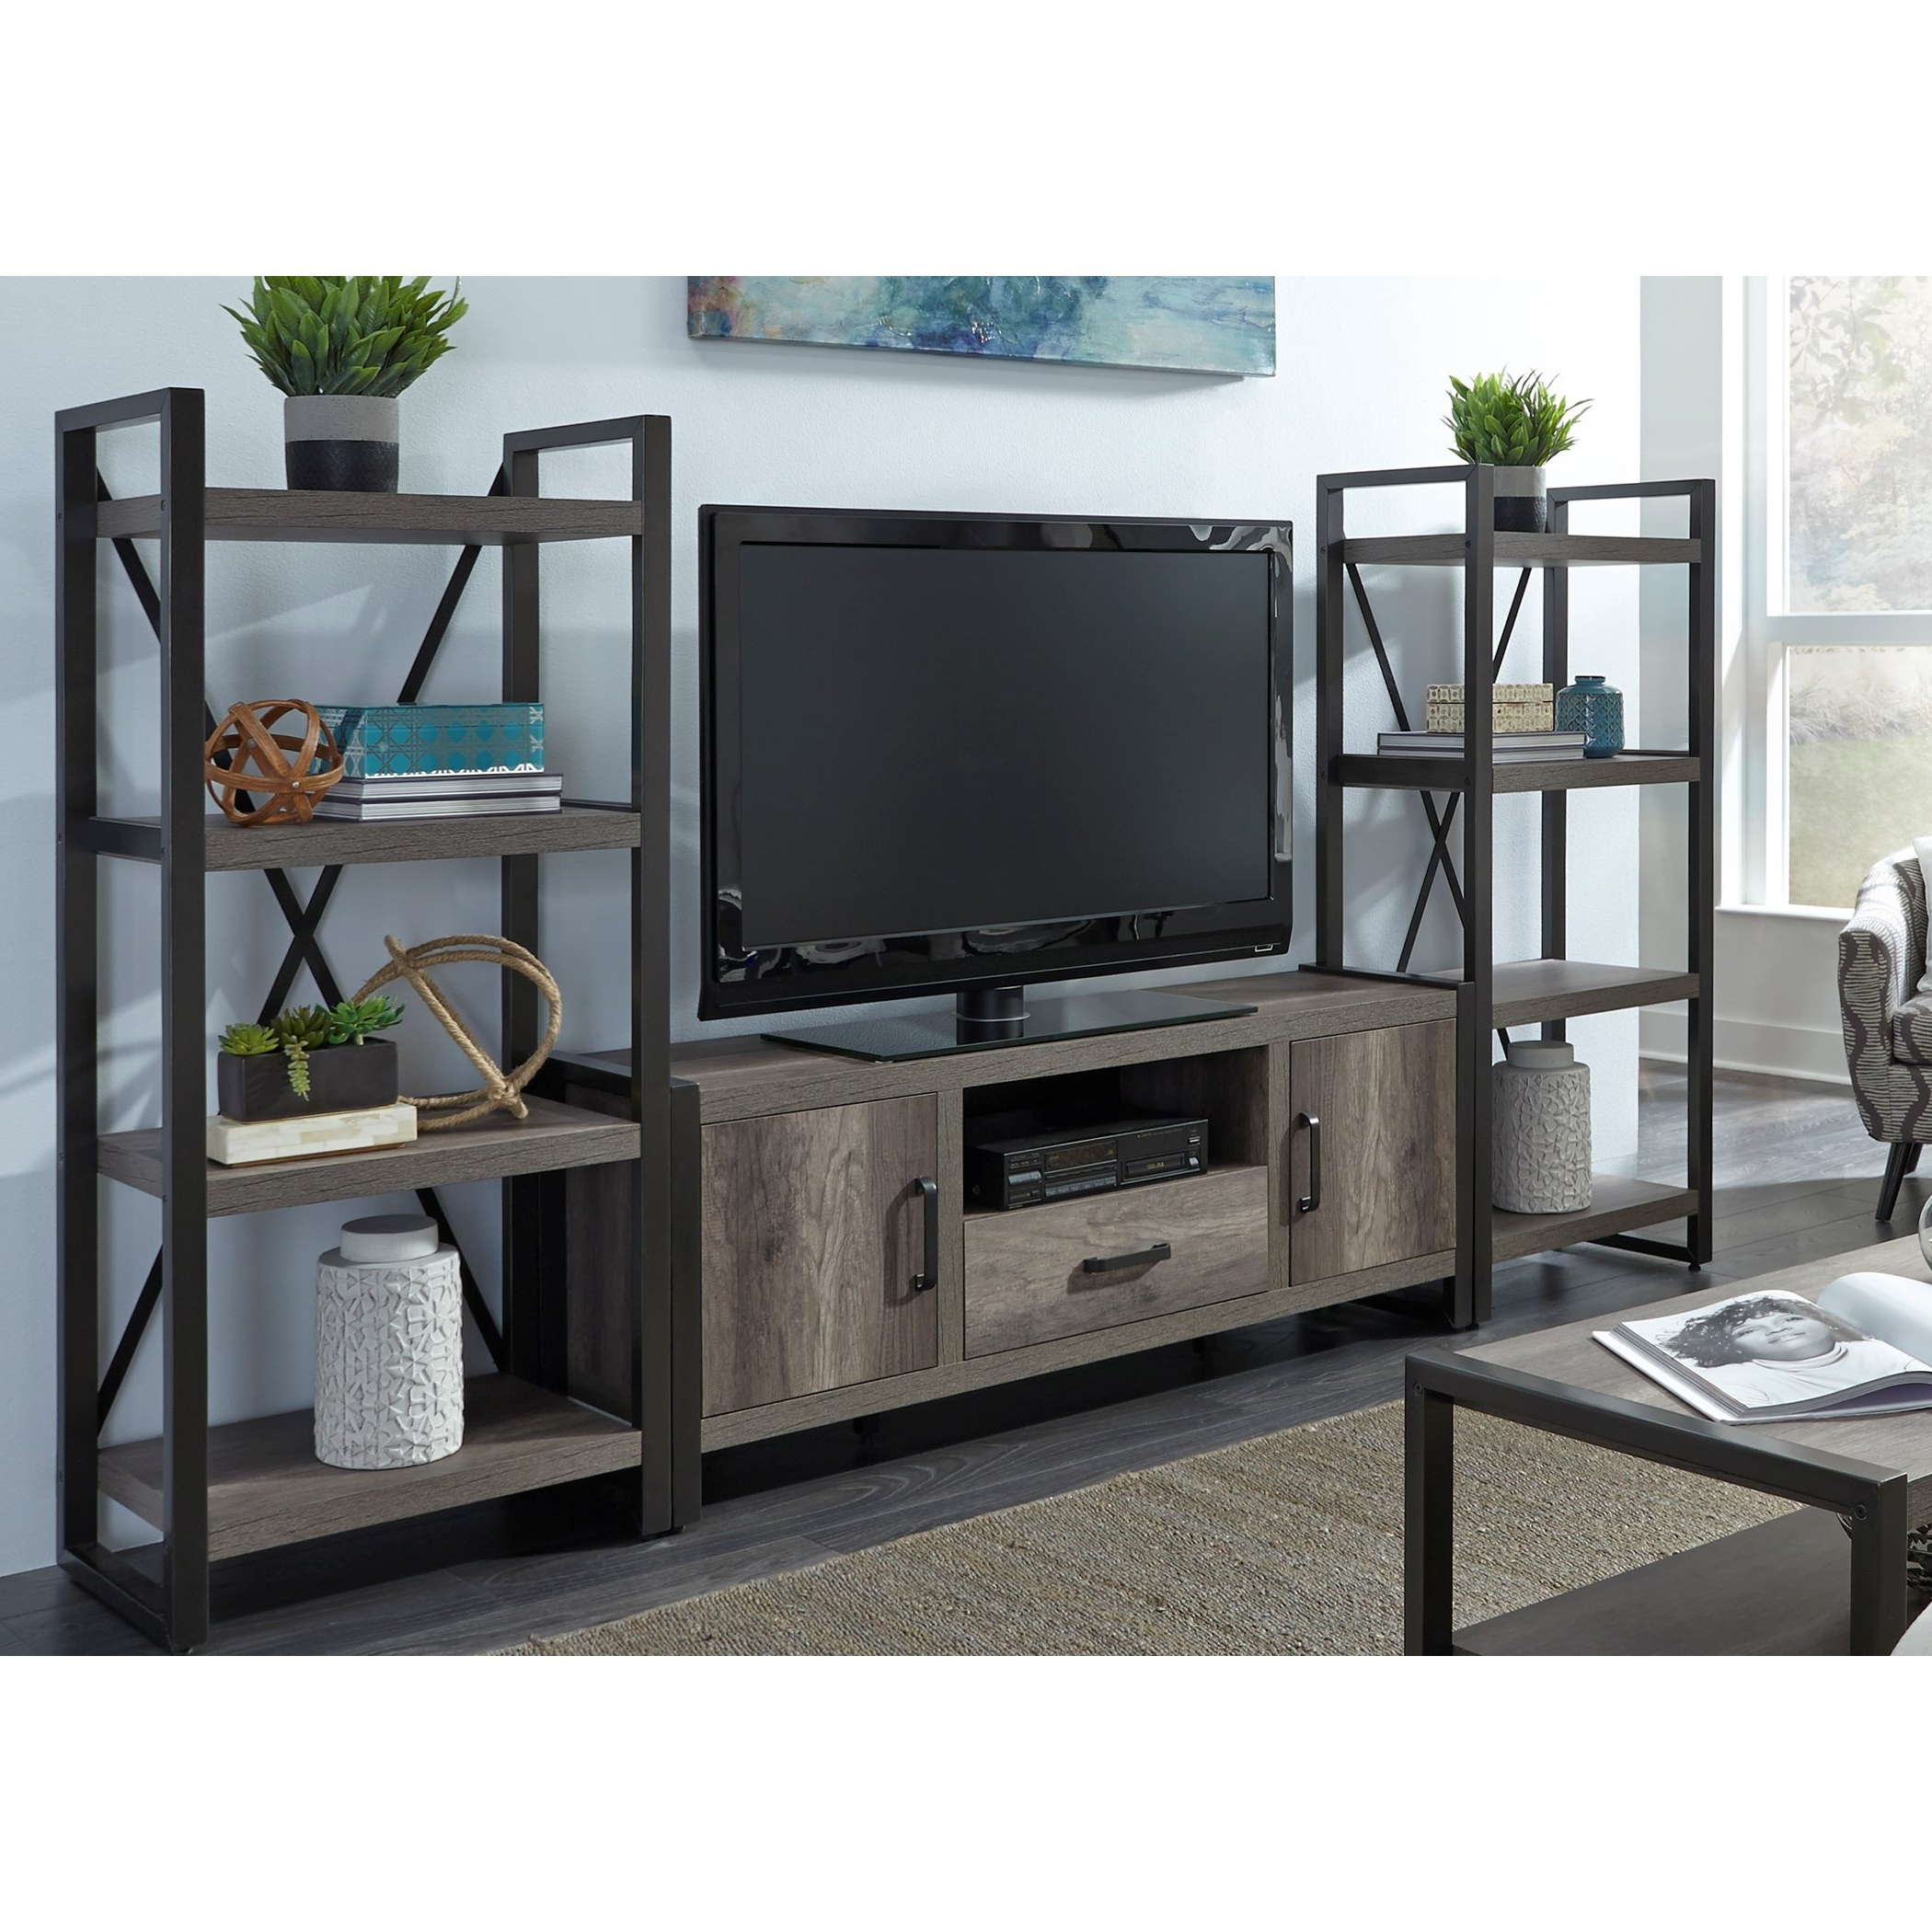 Liberty Furniture Tanners Creek Contemporary Entertainment